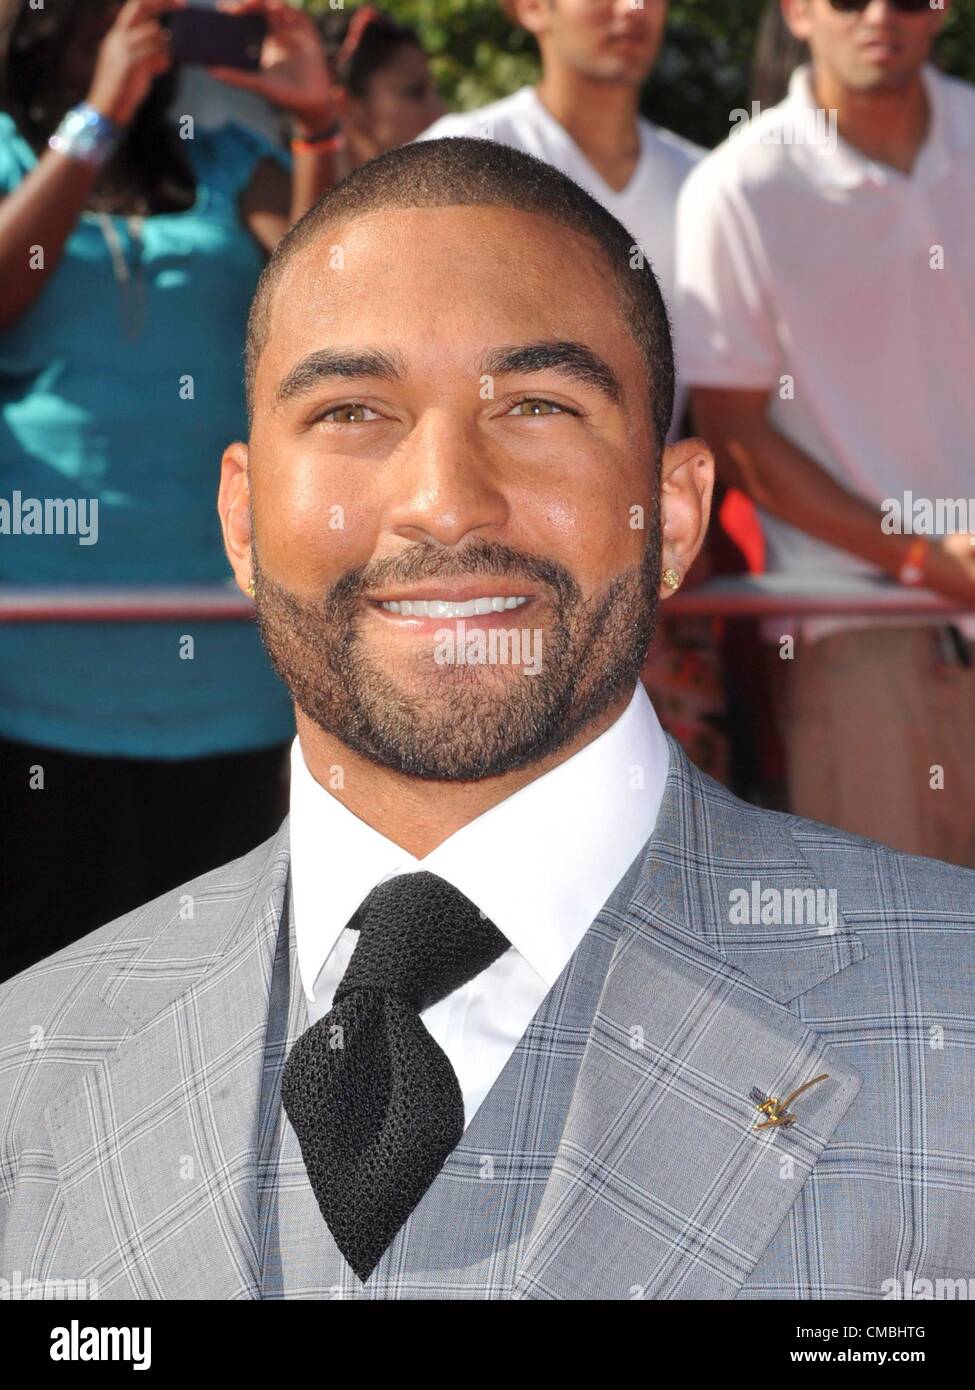 Matt Kemp at arrivals for ESPN's 2012 ESPY Awards - ARRIVALS, Nokia Theatre at L.A. LIVE, Los Angeles, CA July 11, 2012. Photo By: Elizabeth Goodenough/Everett Collection Stock Photo